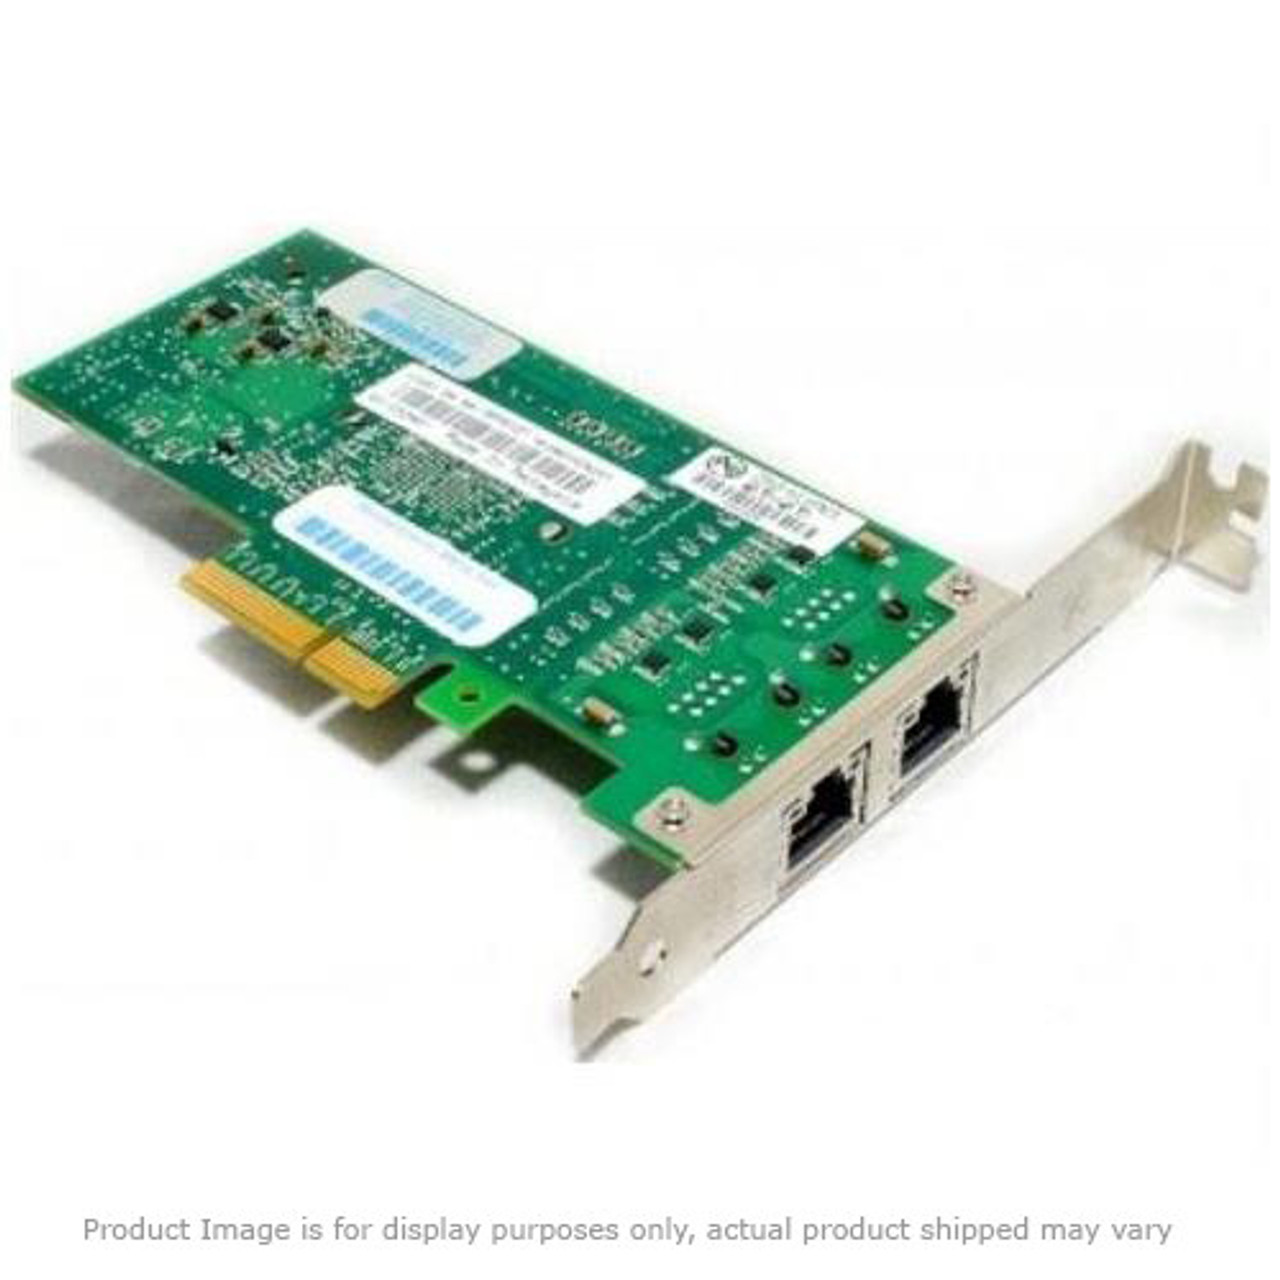 1005354 Exabyte 221l/430a/m ethernet card